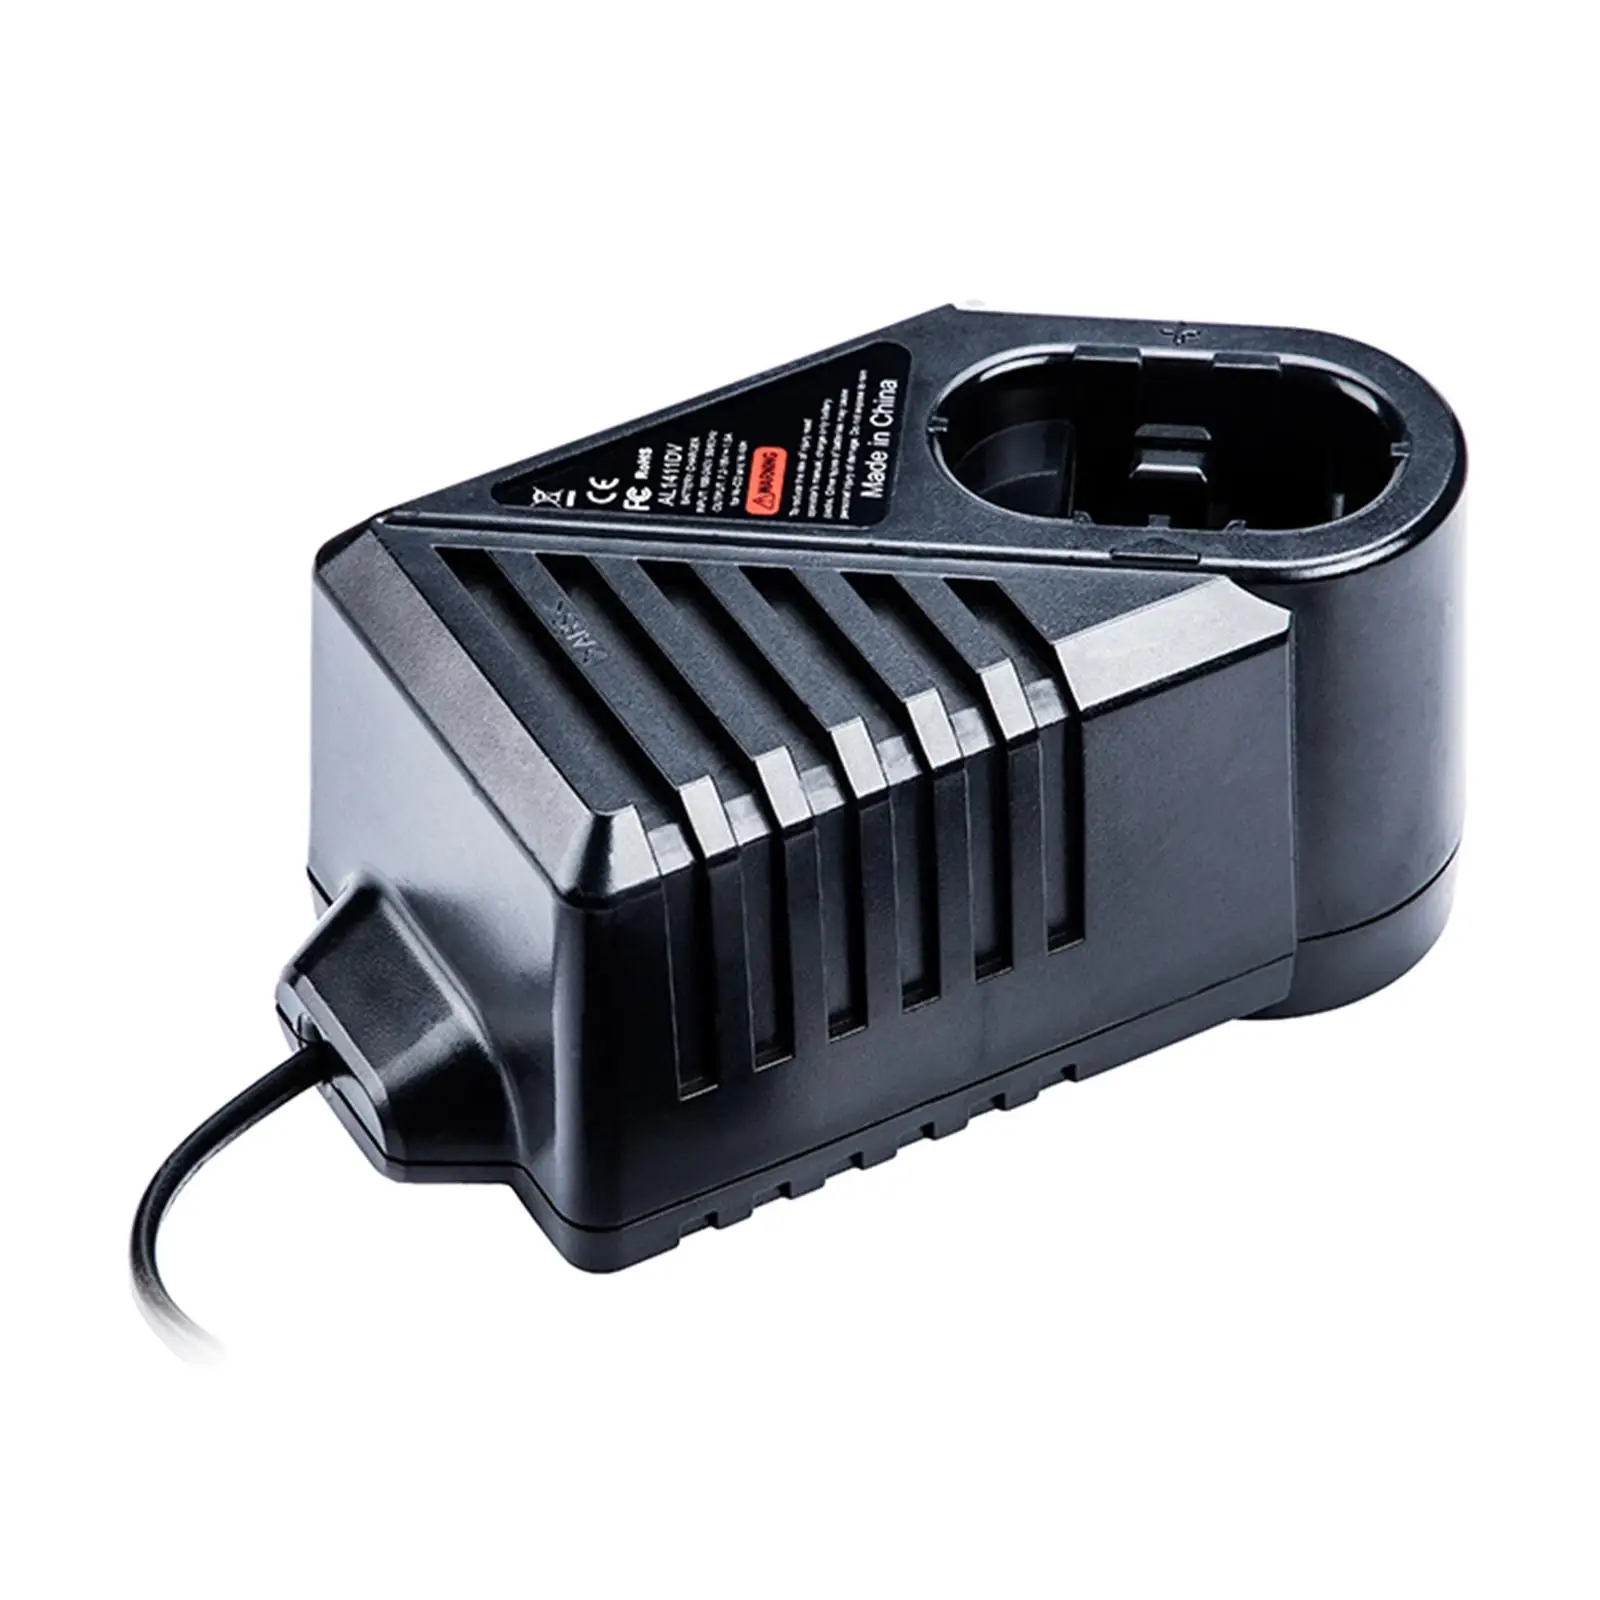 Power Tool Battery Charger Smart Protection Bat038 Bat048 Replacement for 7.2 -18V Ni-mh Ni-cd Gsr1 Gsr14.4-2 Gsb14.4-2